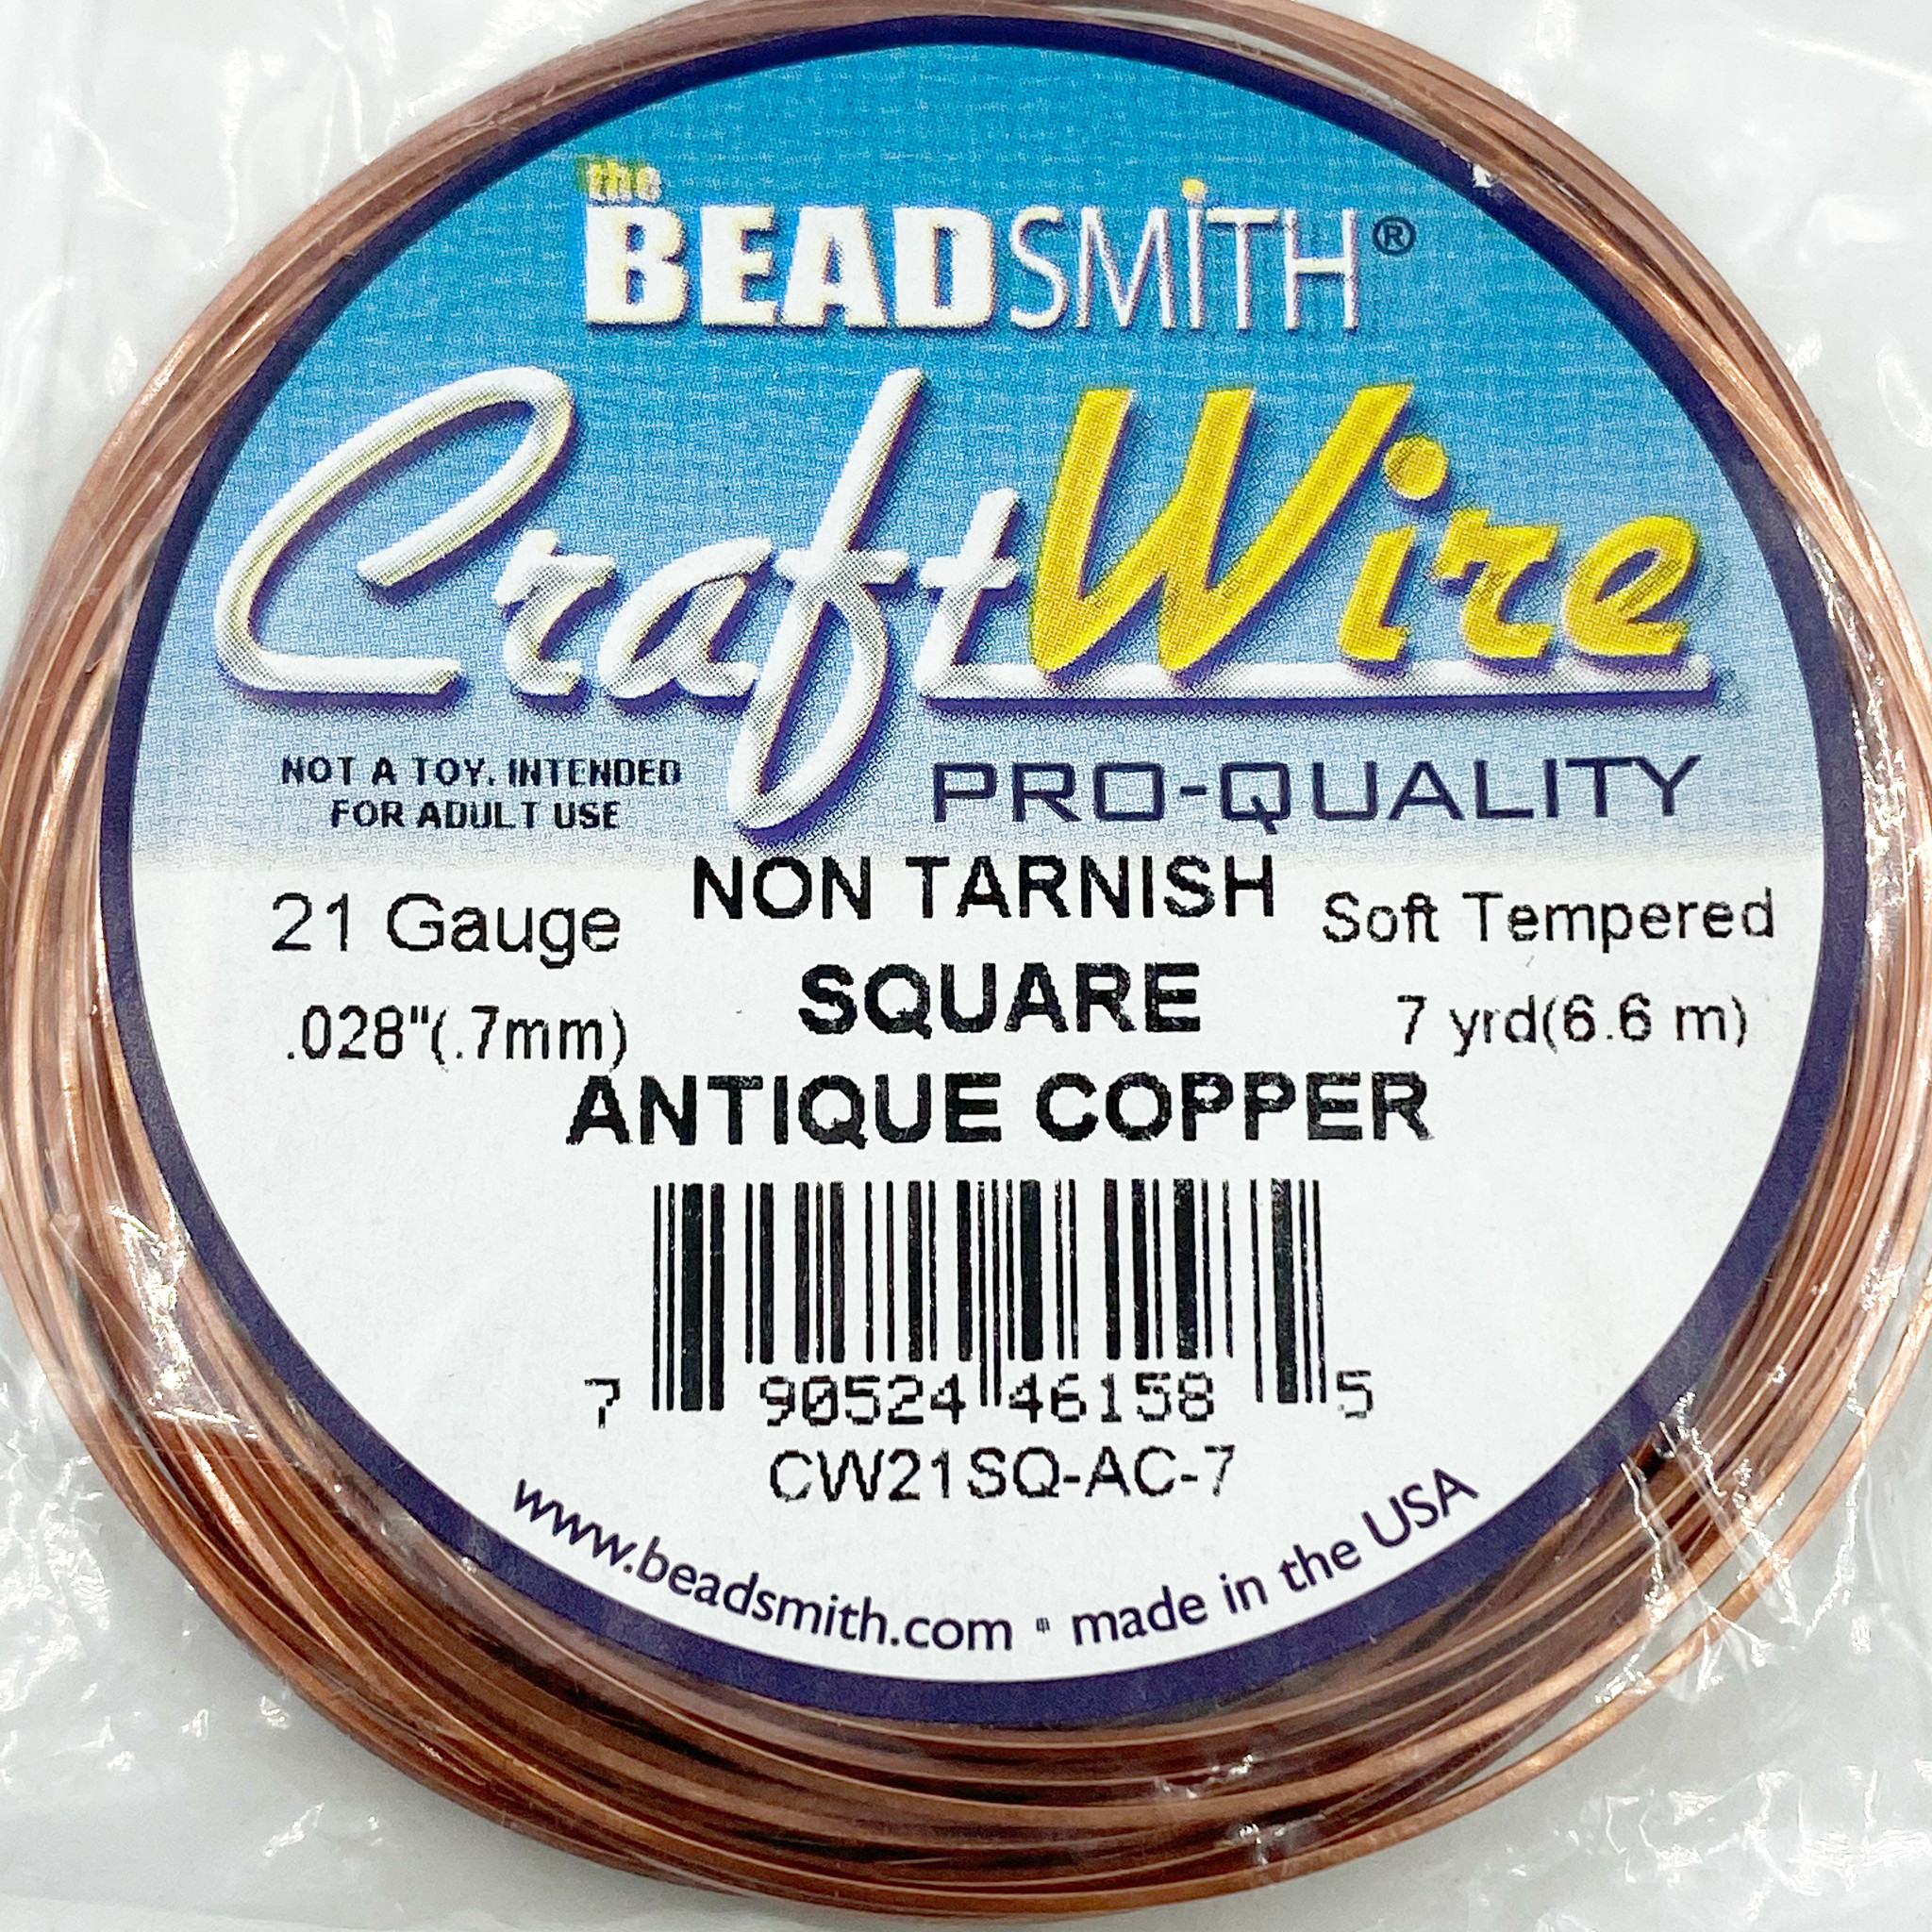 2495S219 – 28 Ga Crafting Wire – 40 yds. – Copper